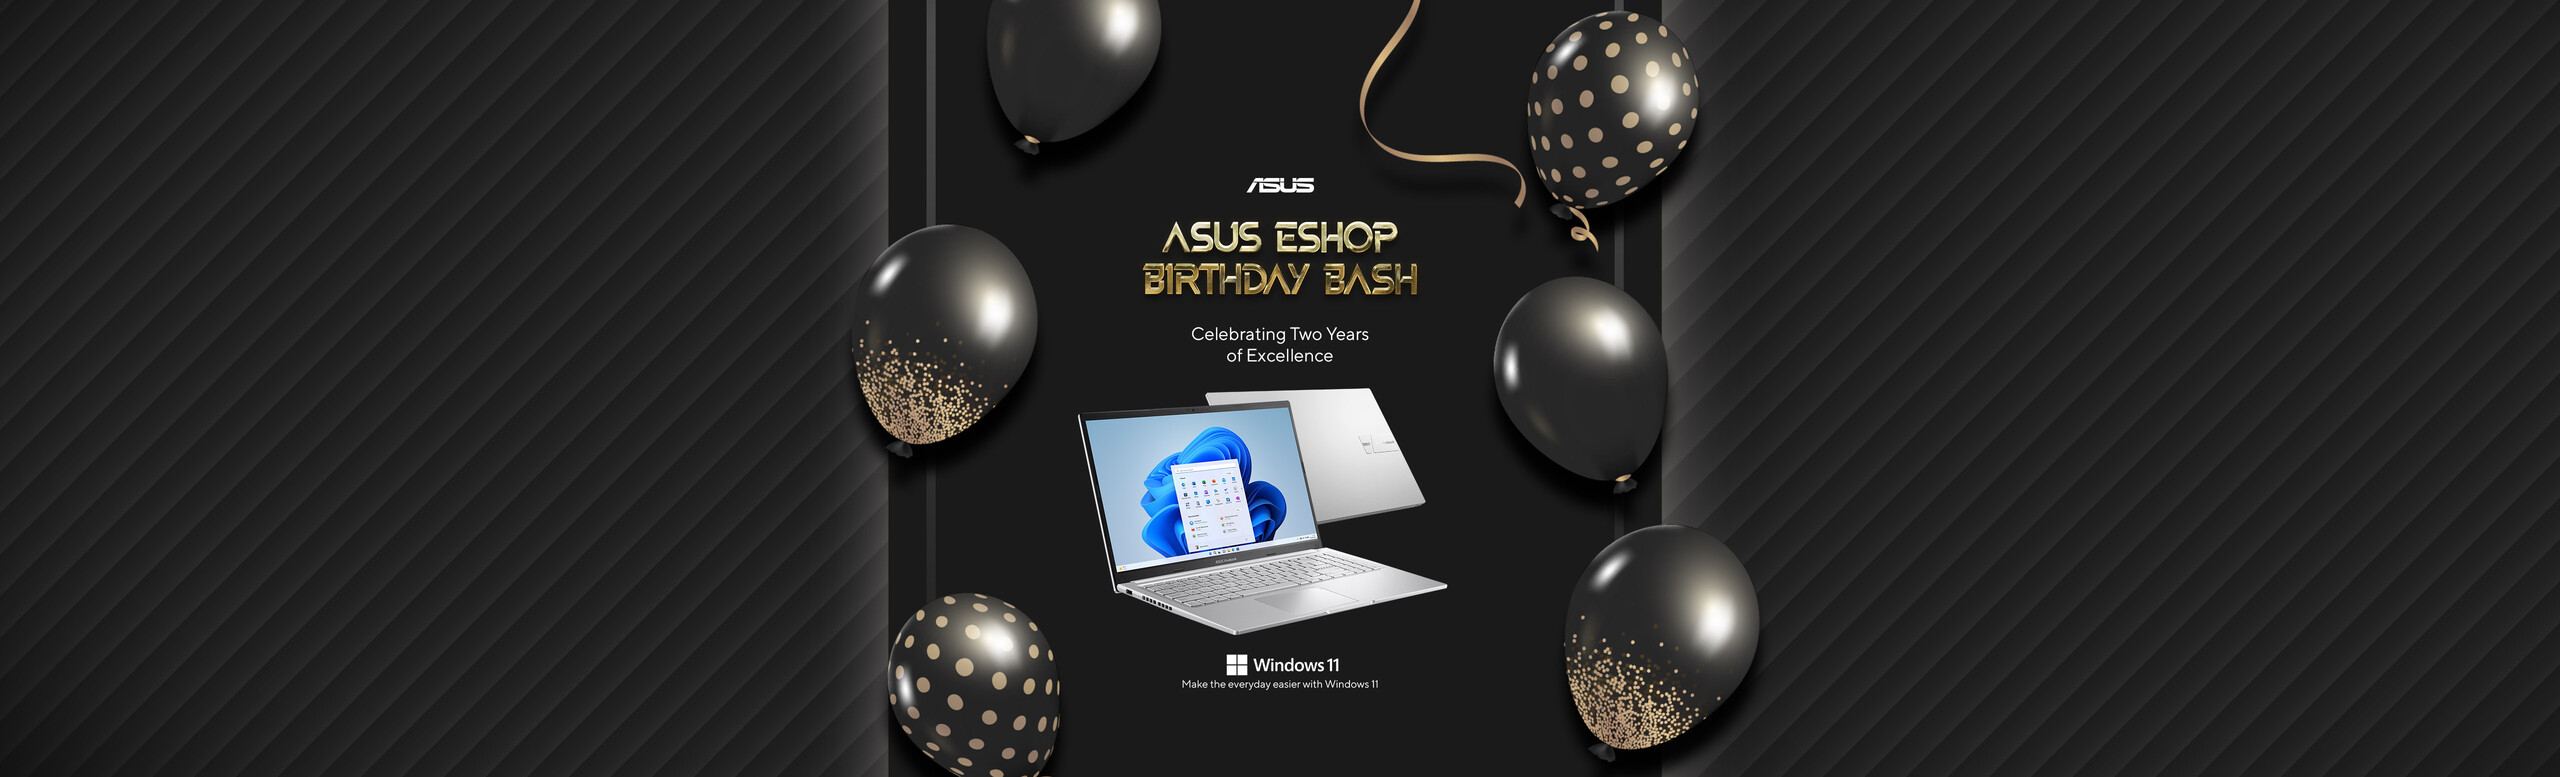 ASUS and ROG Birthday Deals